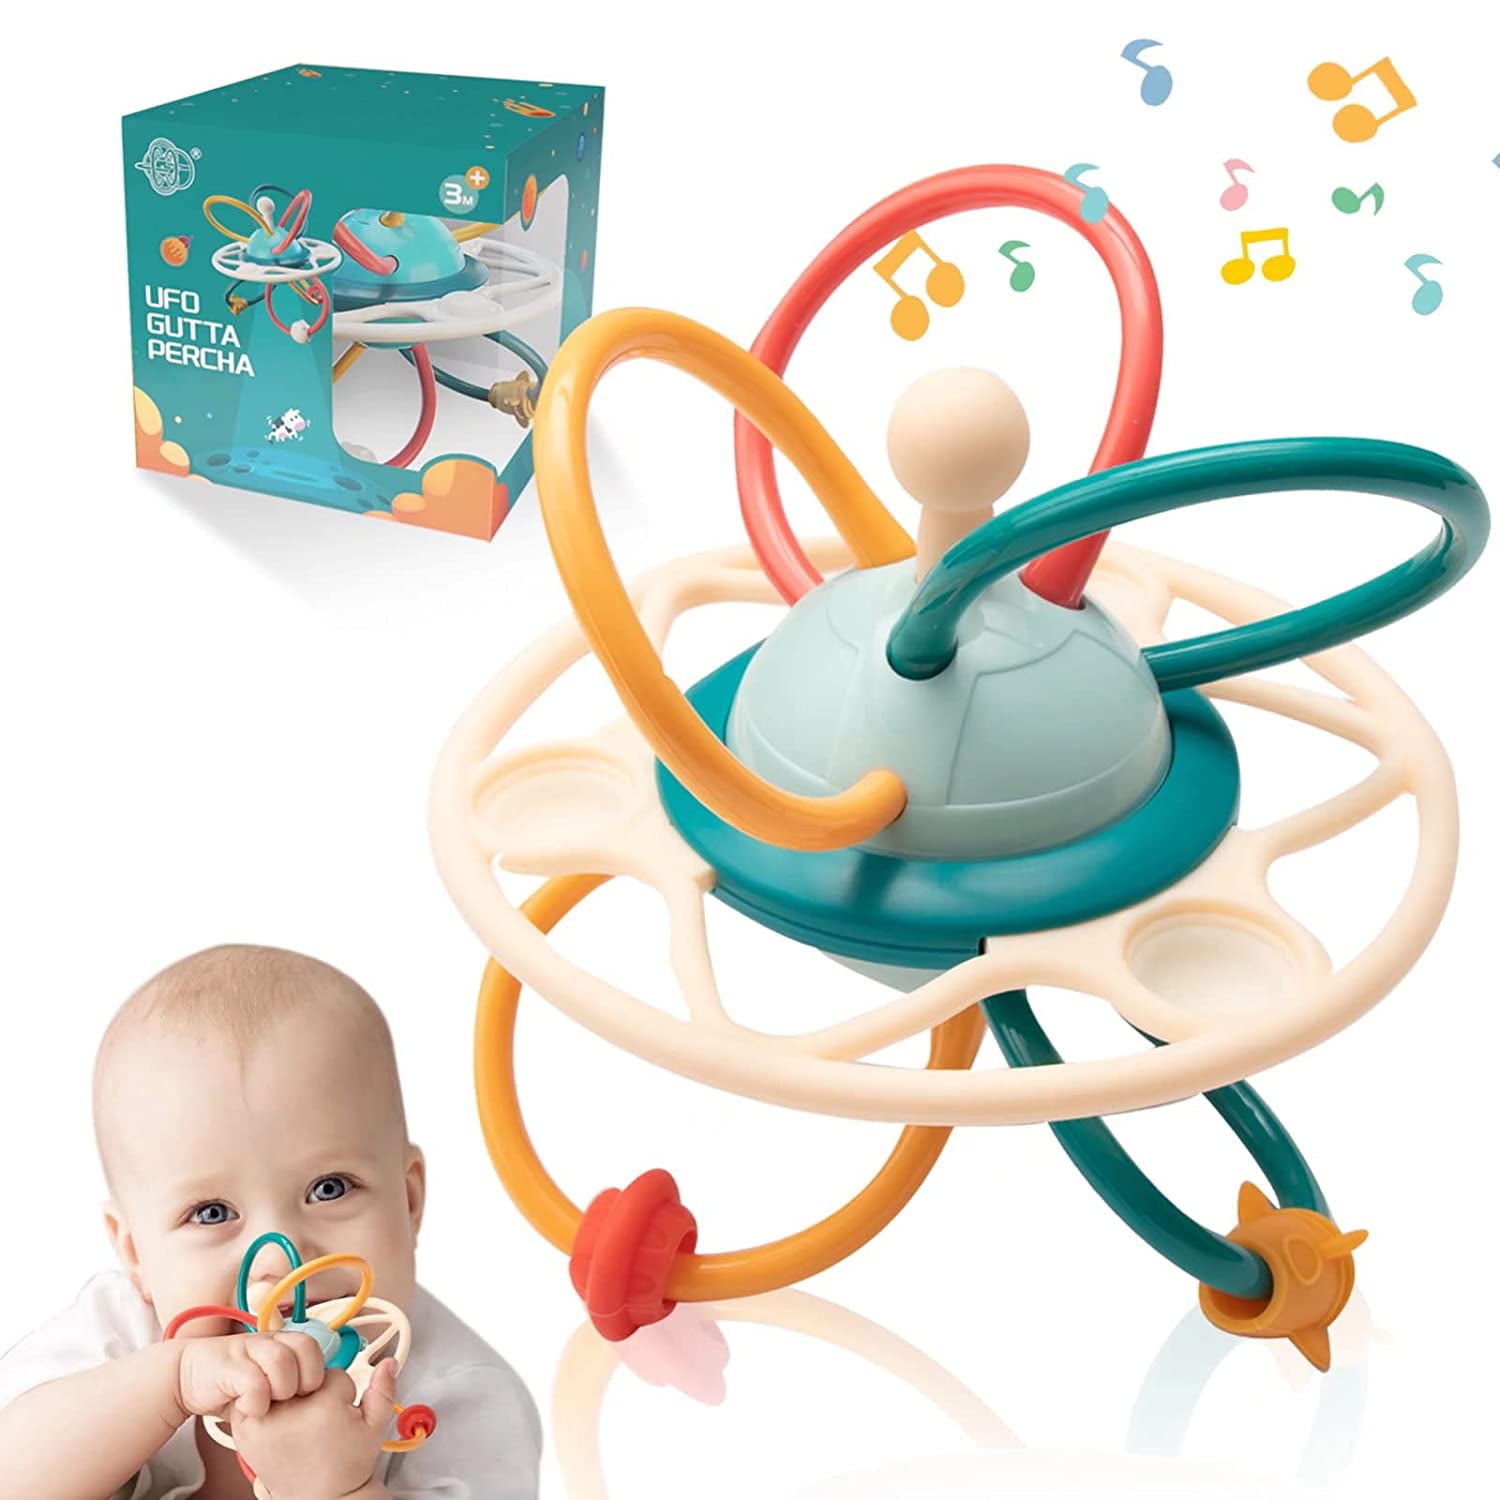 Infants Teething Play Toys Boy 10 Baby Rattles 3 9 Development Educational Musical Gift Set for 0 6 4 18 Month Old Grab Ball Shaker 1 Newborn 5 Girl 12 Babies Chewing Silicone Teether 